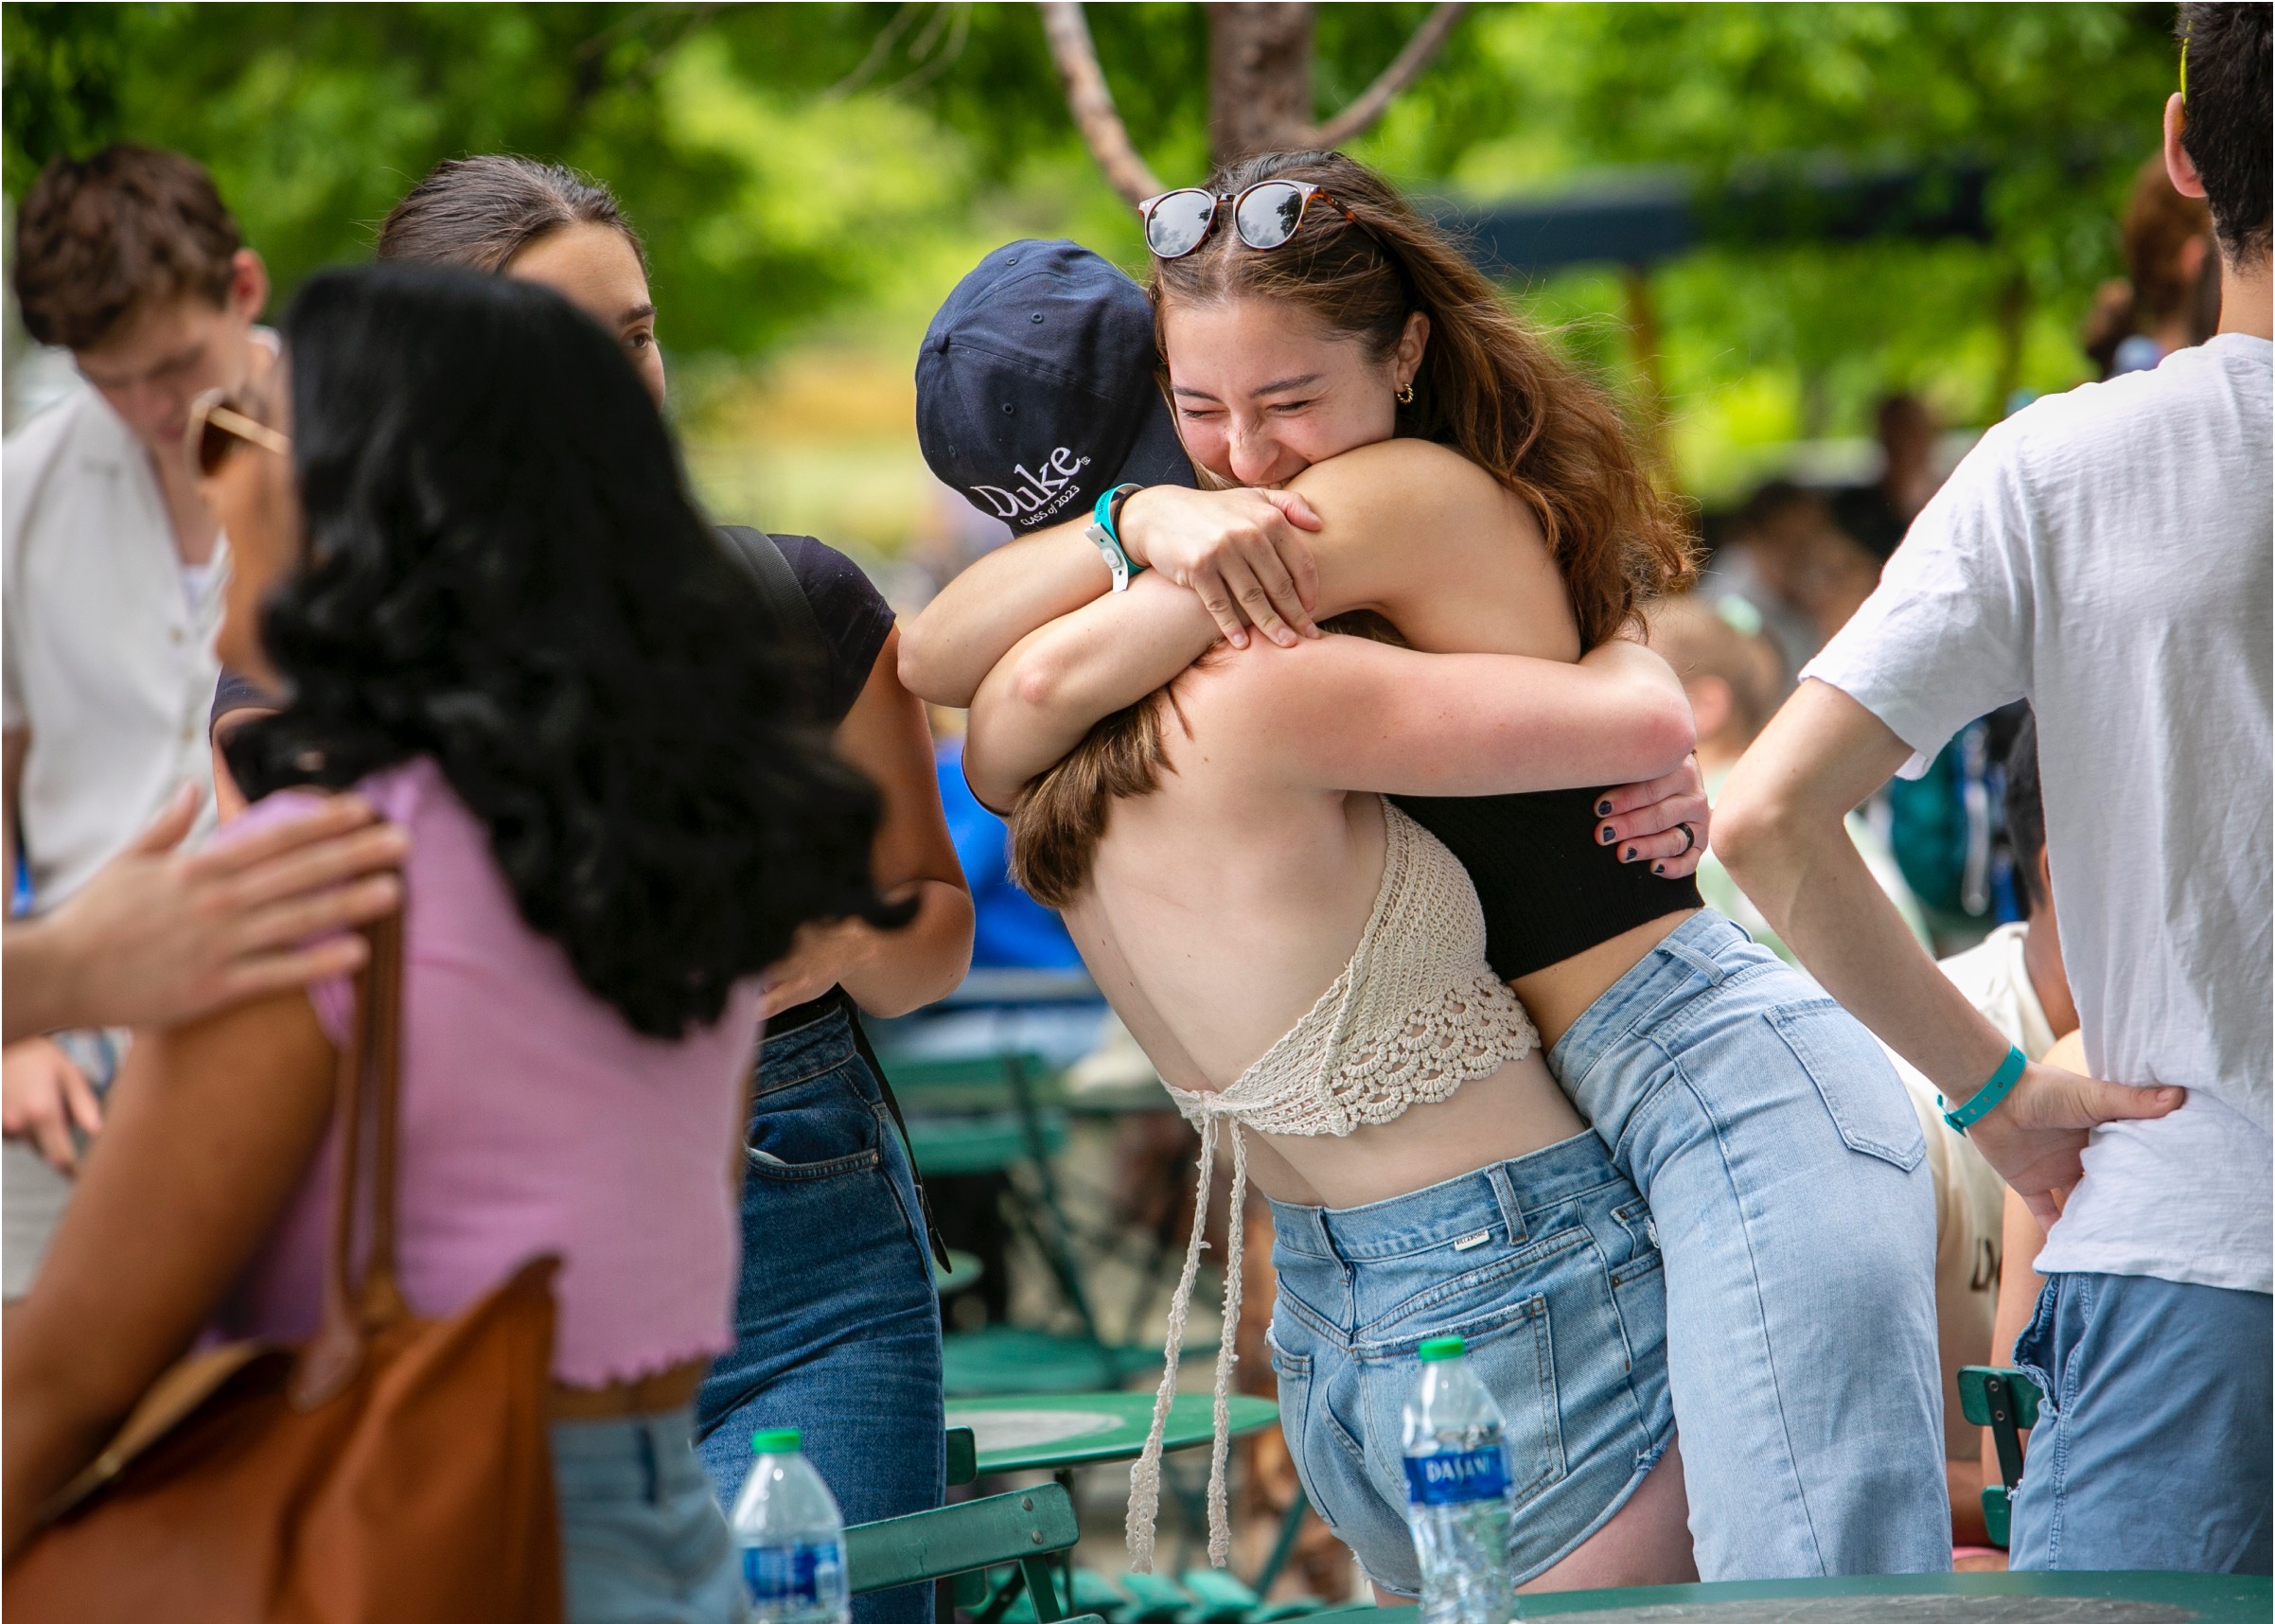 students embracing at an outdoor function